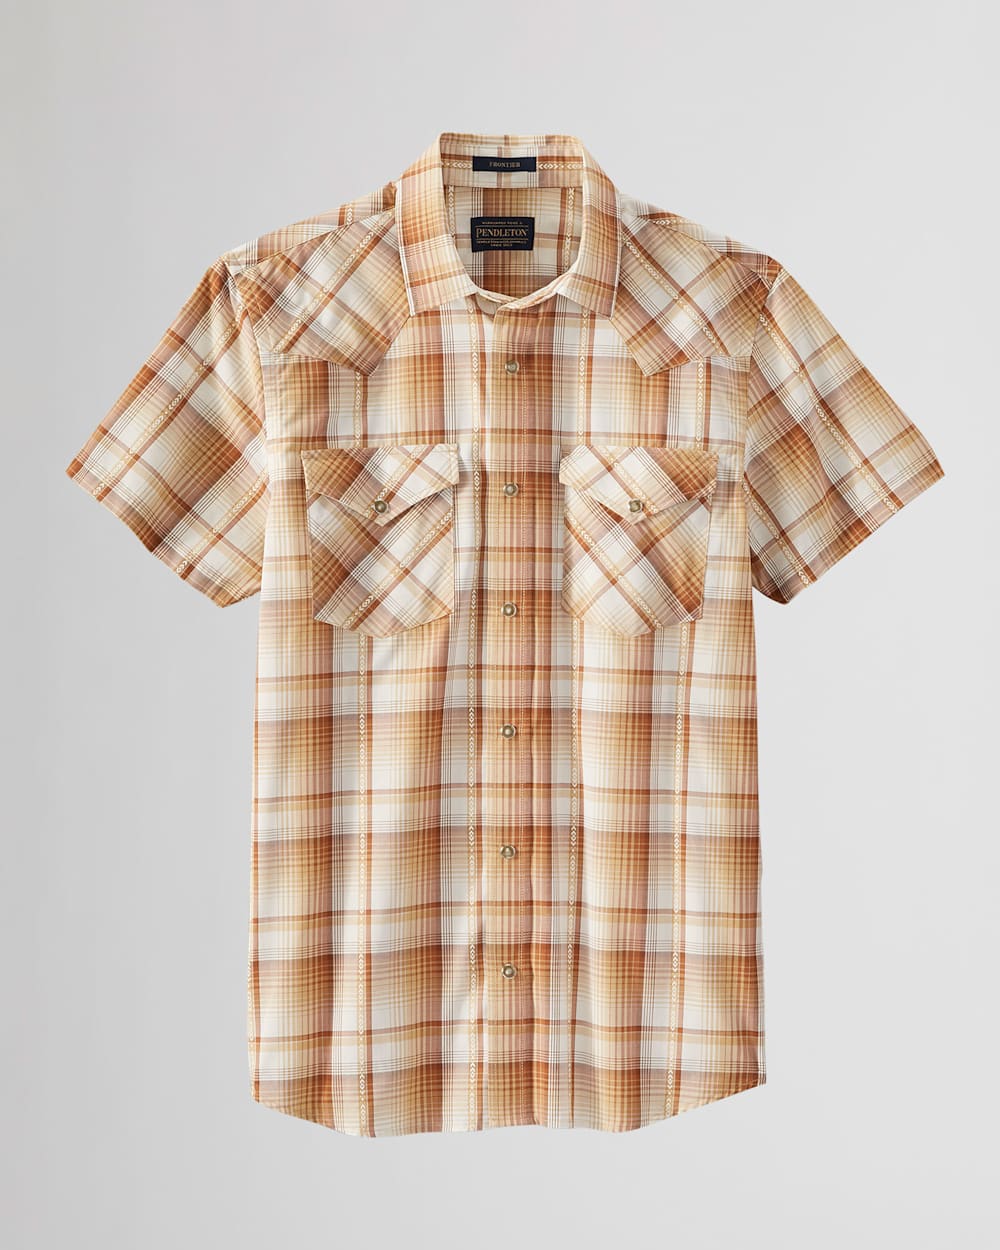 MEN'S SHORT-SLEEVE FRONTIER SHIRT IN GOLD/BROWN PLAID image number 1